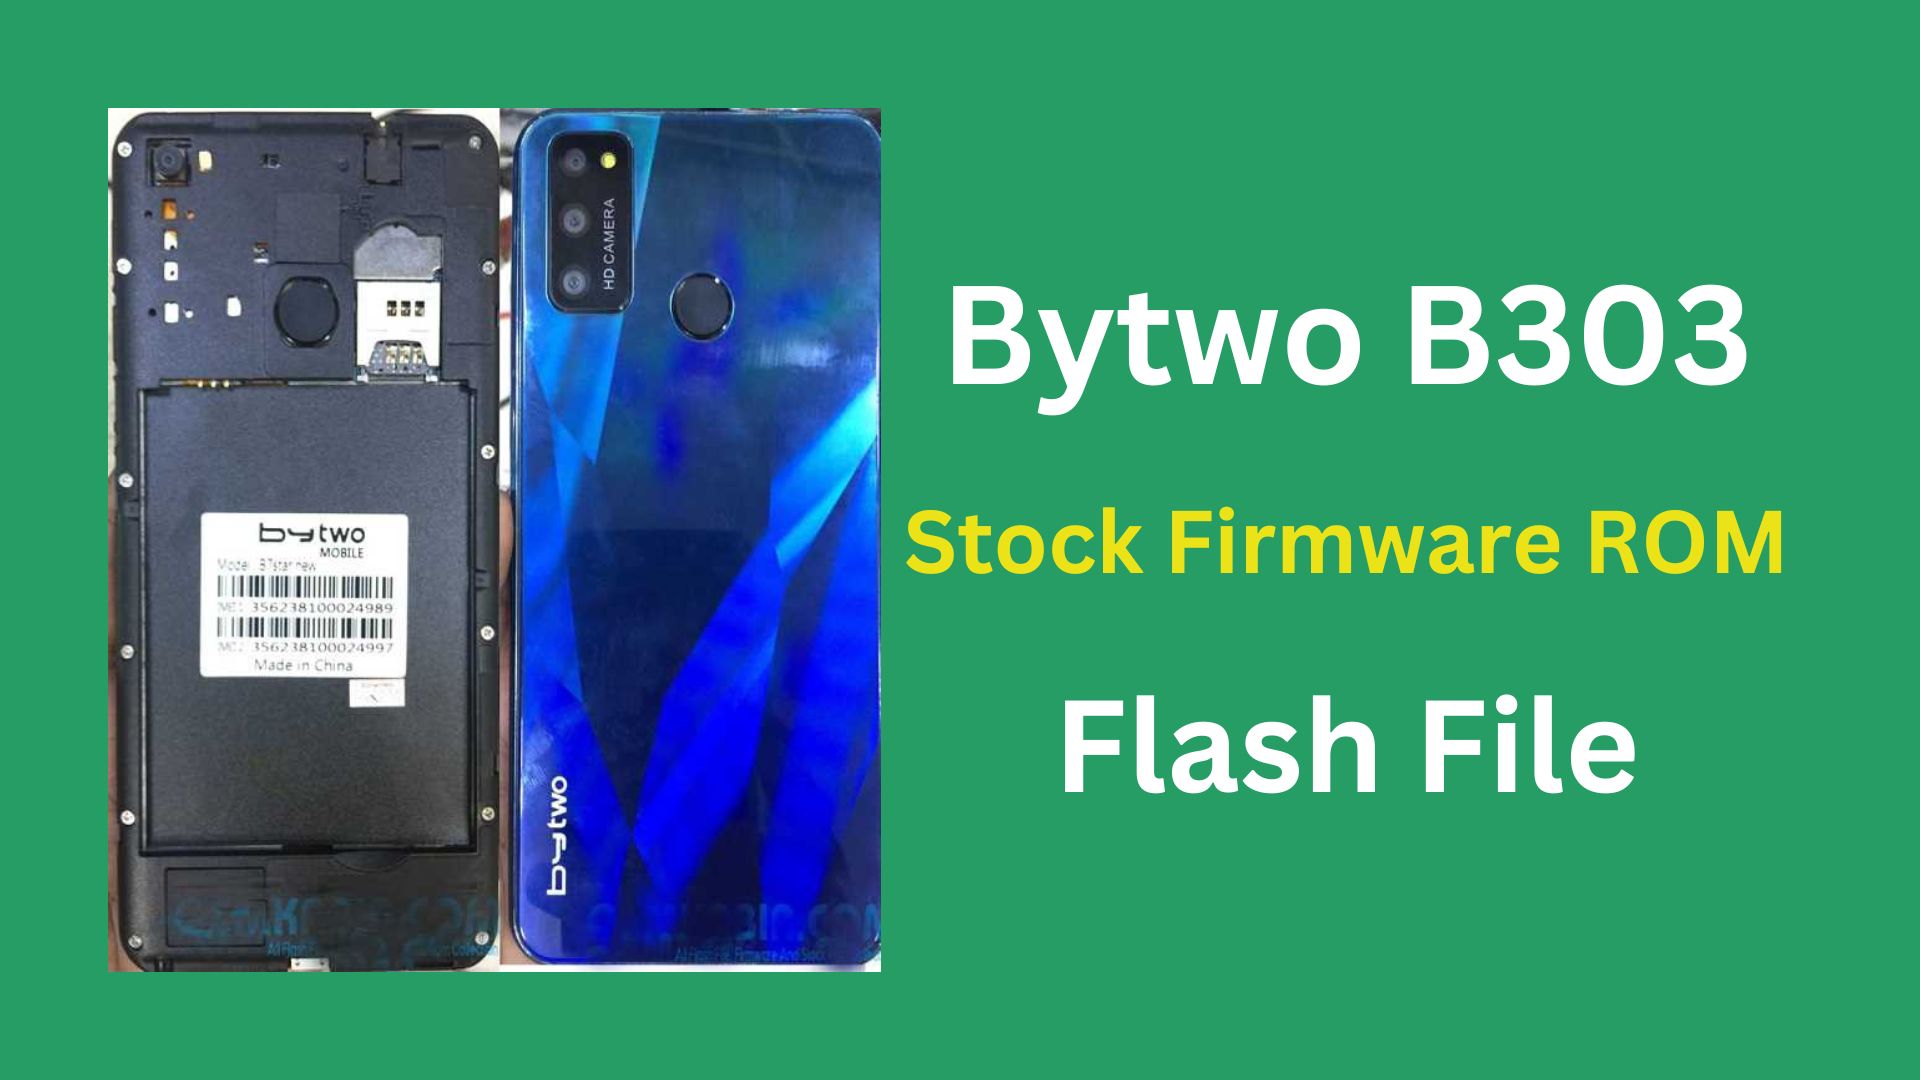 Bytwo B7 Star New Stock Firmware ROM (Flash File)